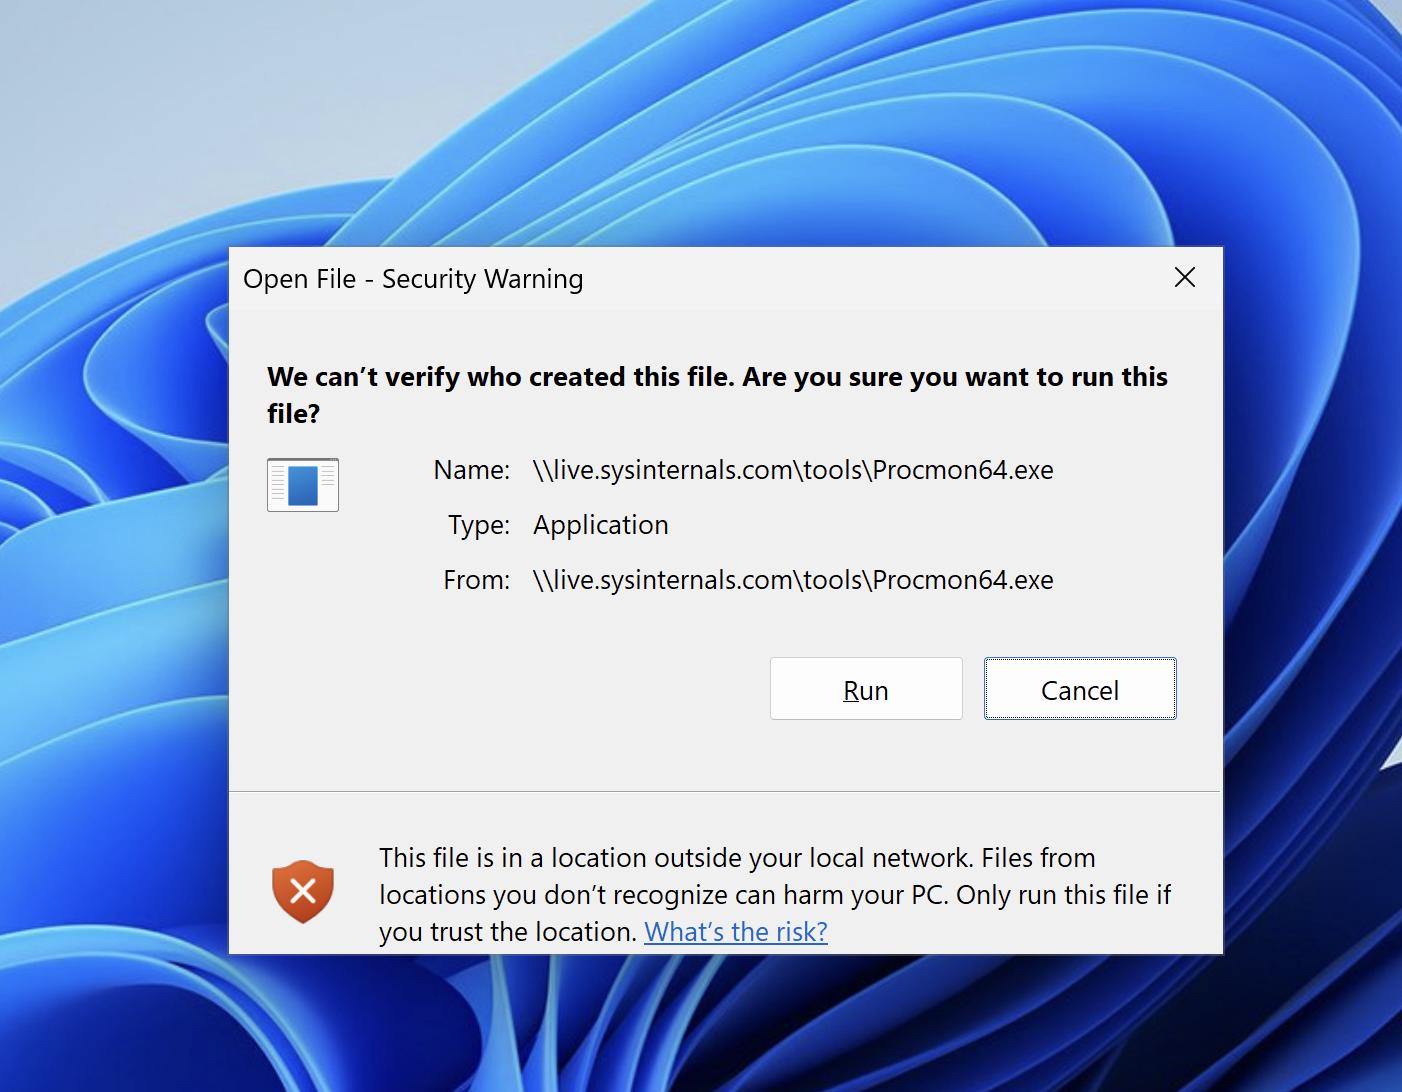 Windows popup: We can't verify who created this file. Are you sure you want to run this file?